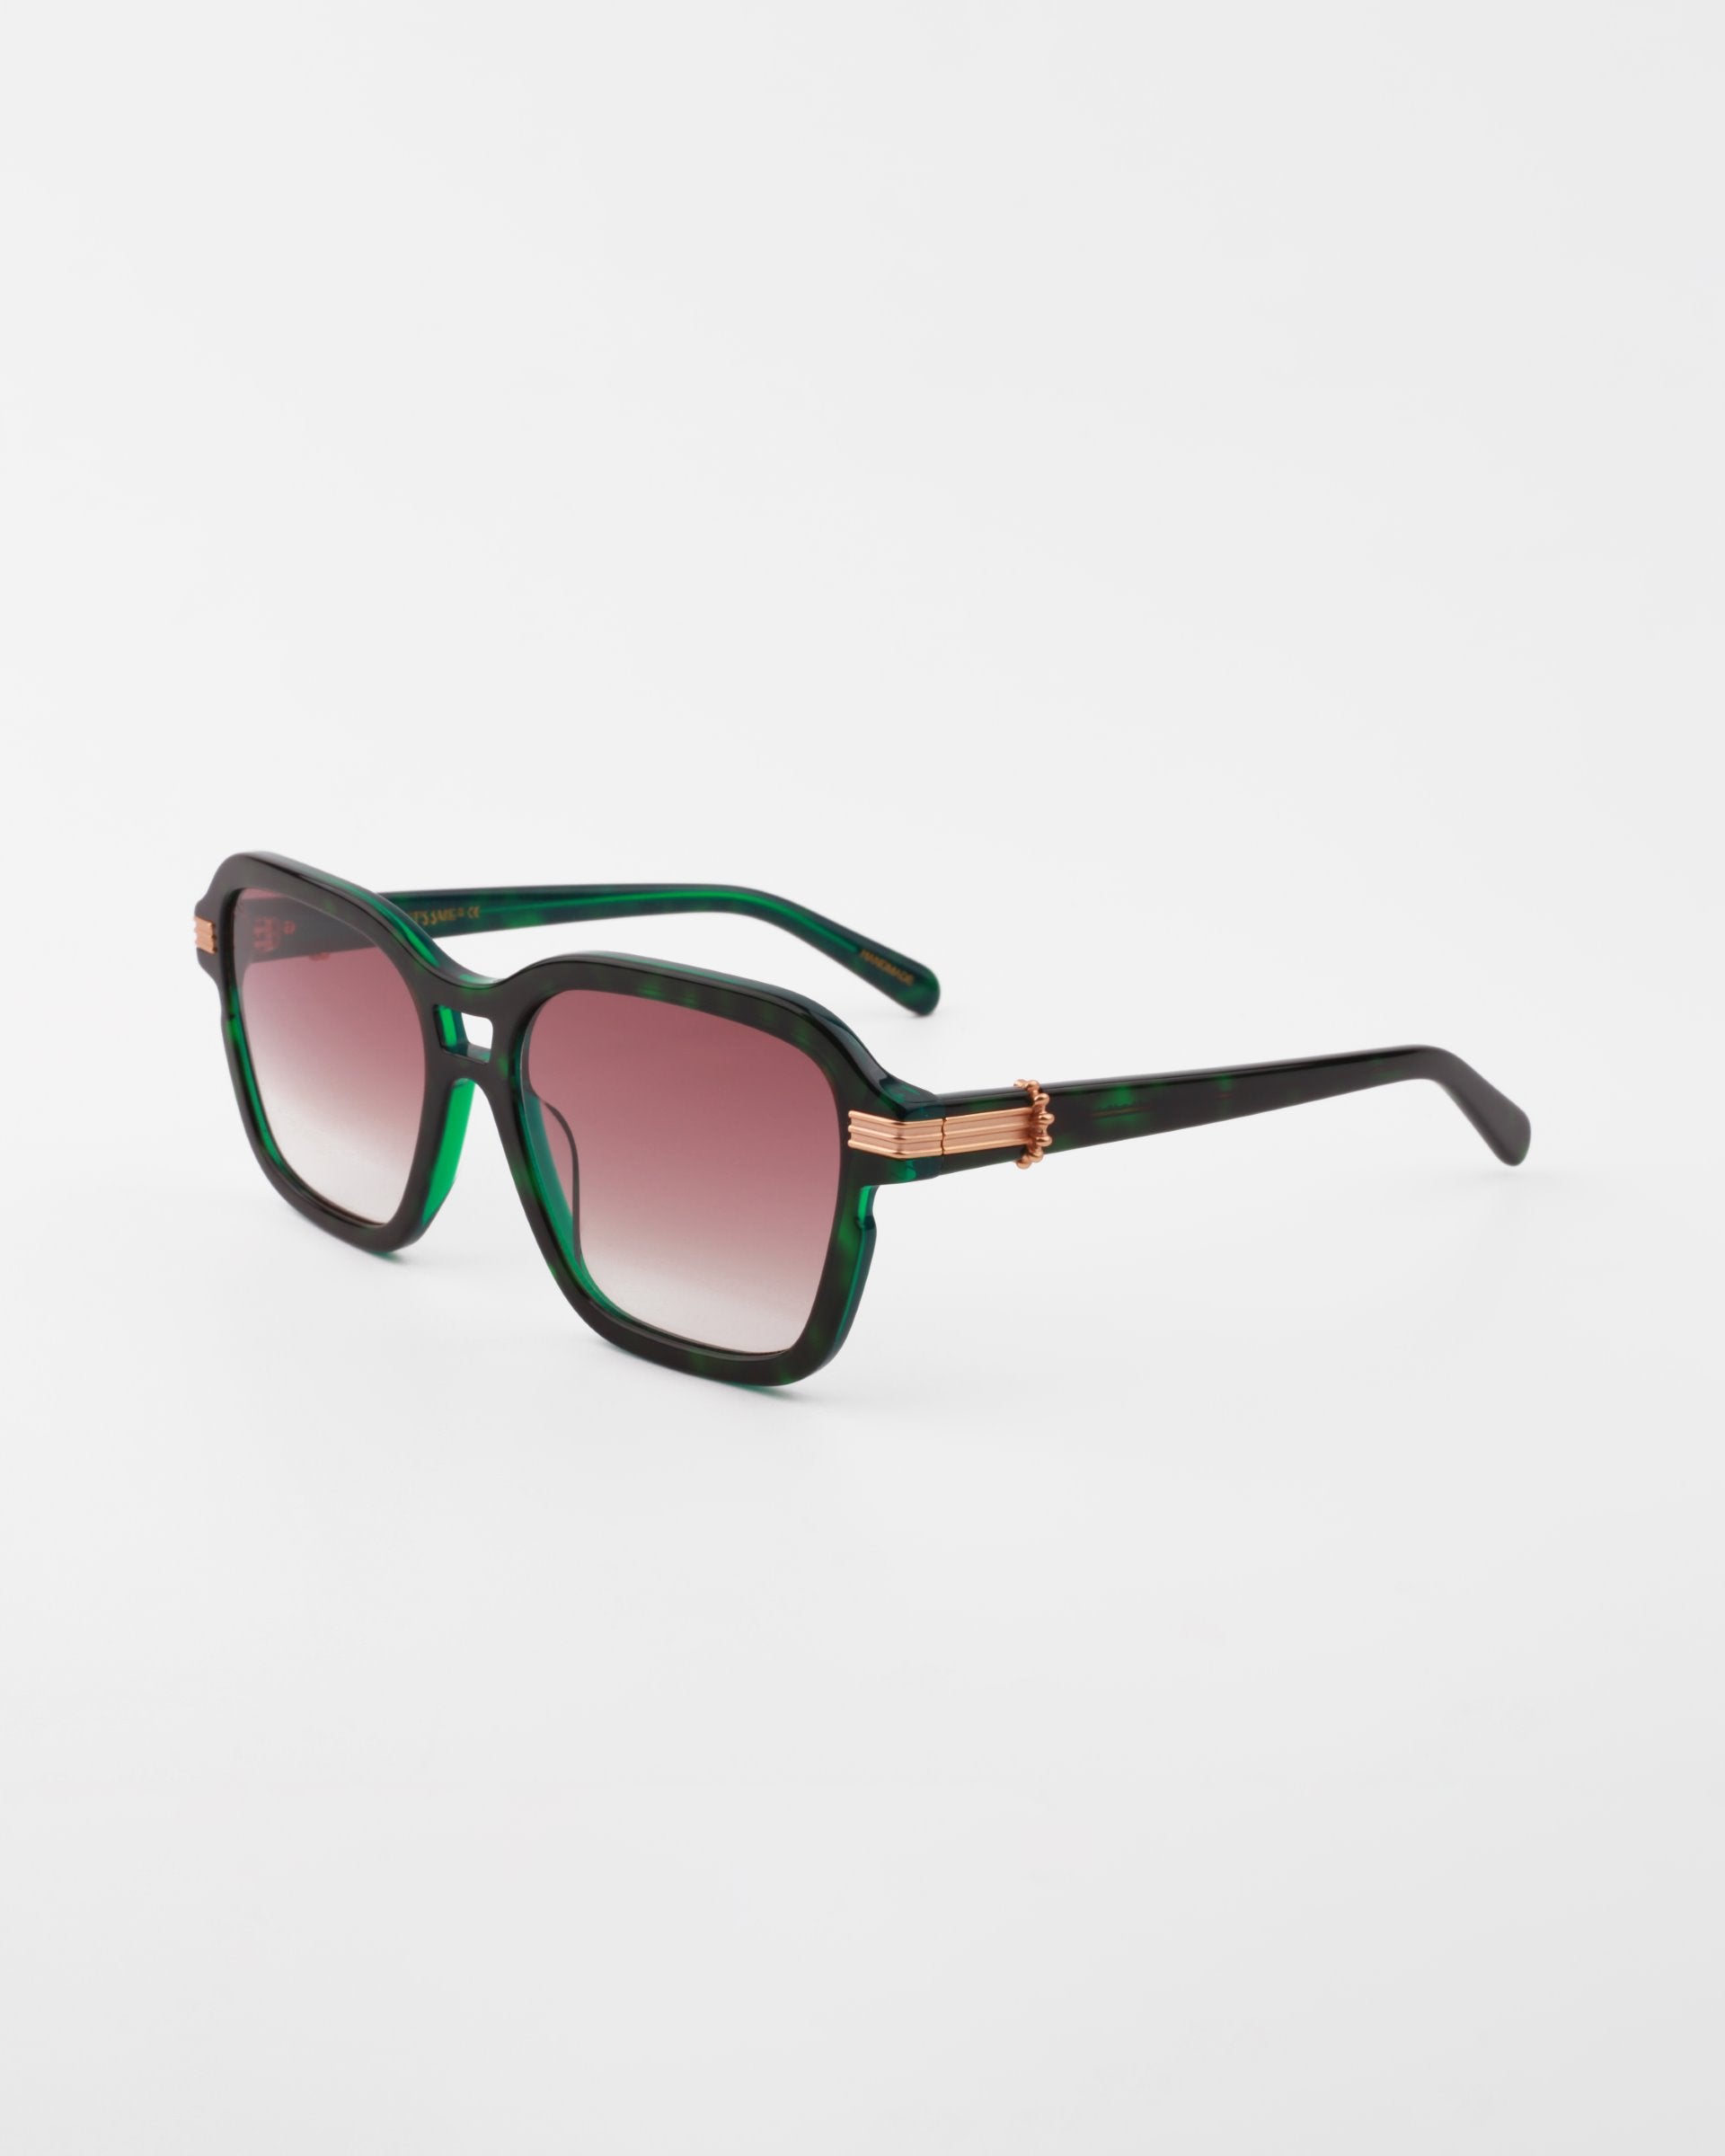 Rectangular gradient green and black Shadyside sunglasses by For Art&#39;s Sake® with gold-plated temple detail, positioned on a reflective white surface. The lenses feature a brown gradient tint and are made from shatter-resistant nylon.